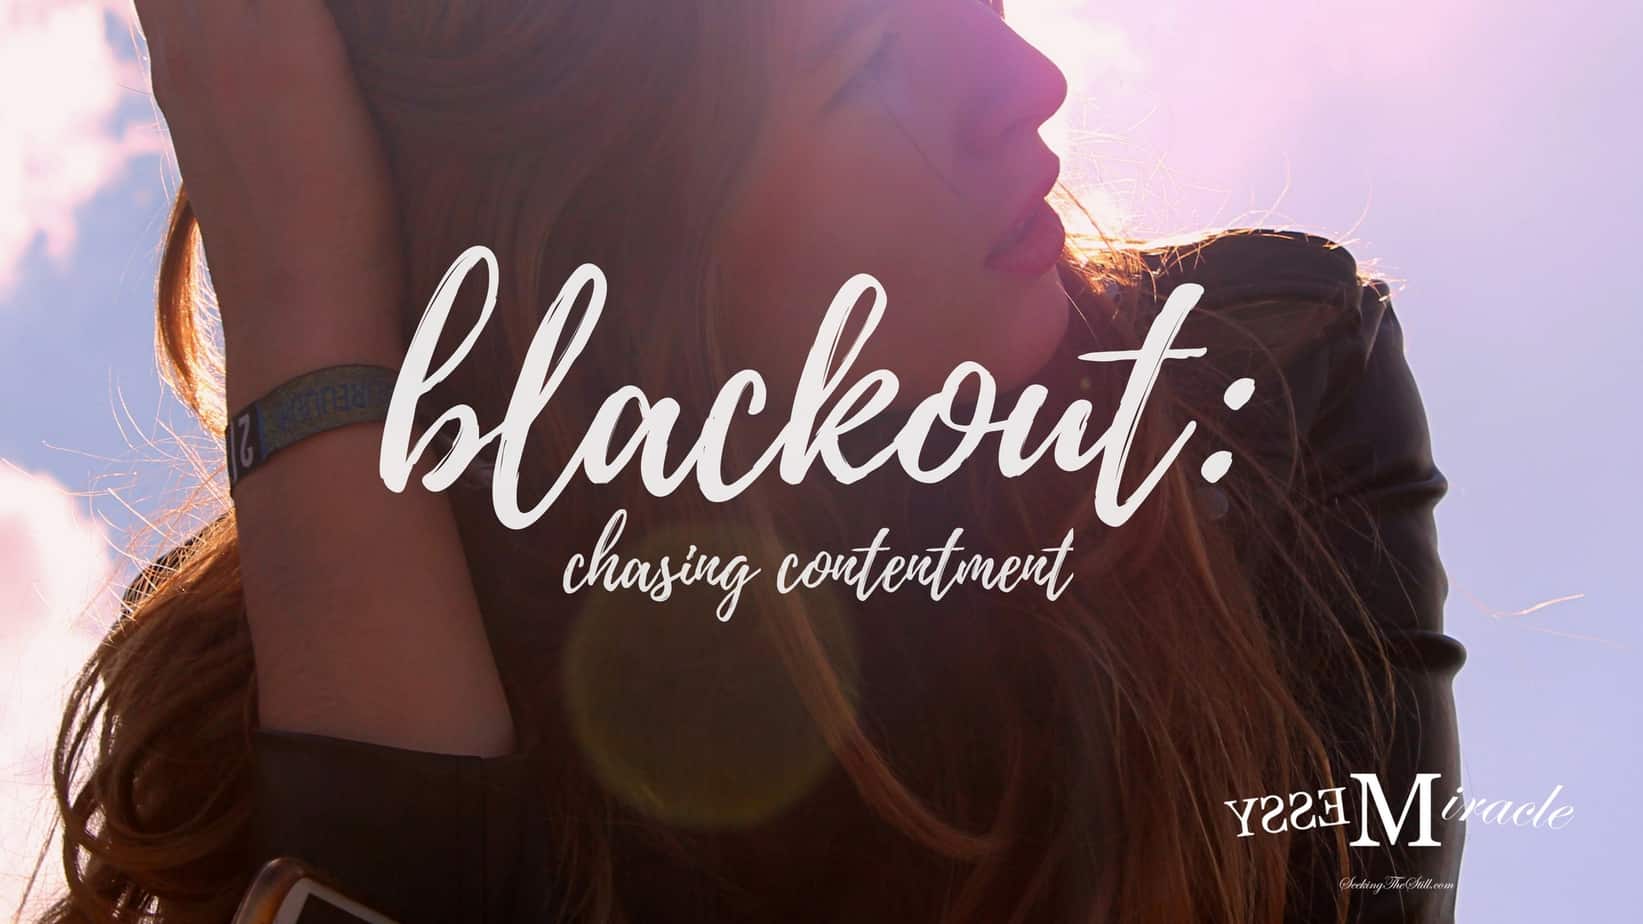 Blackout: Chasing Contentment